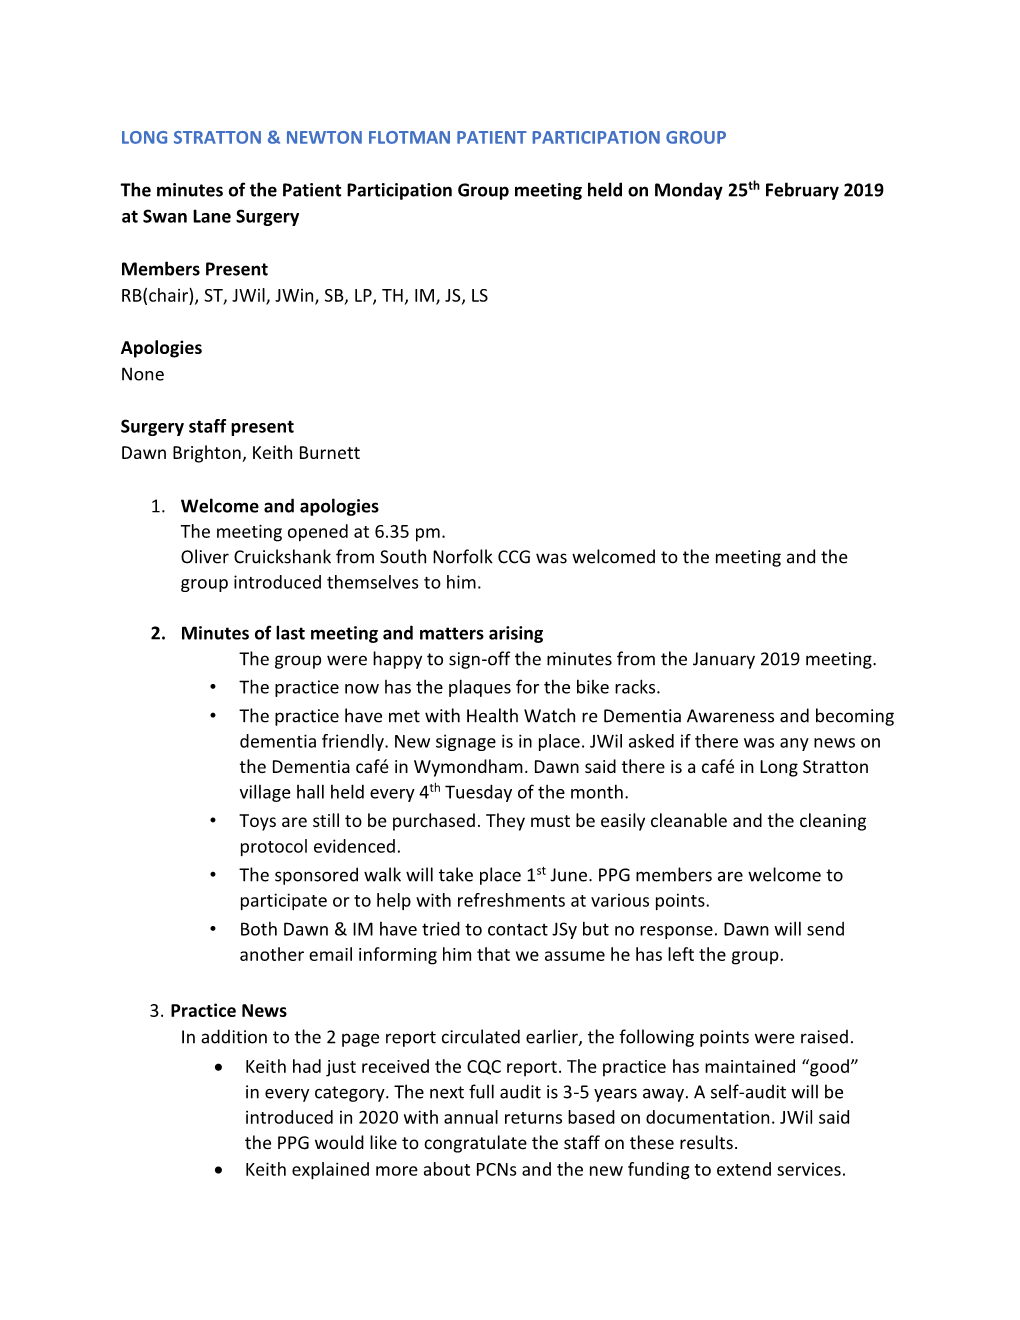 Minutes of the Patient Participation Group Meeting Held on Monday 25Th February 2019 at Swan Lane Surgery